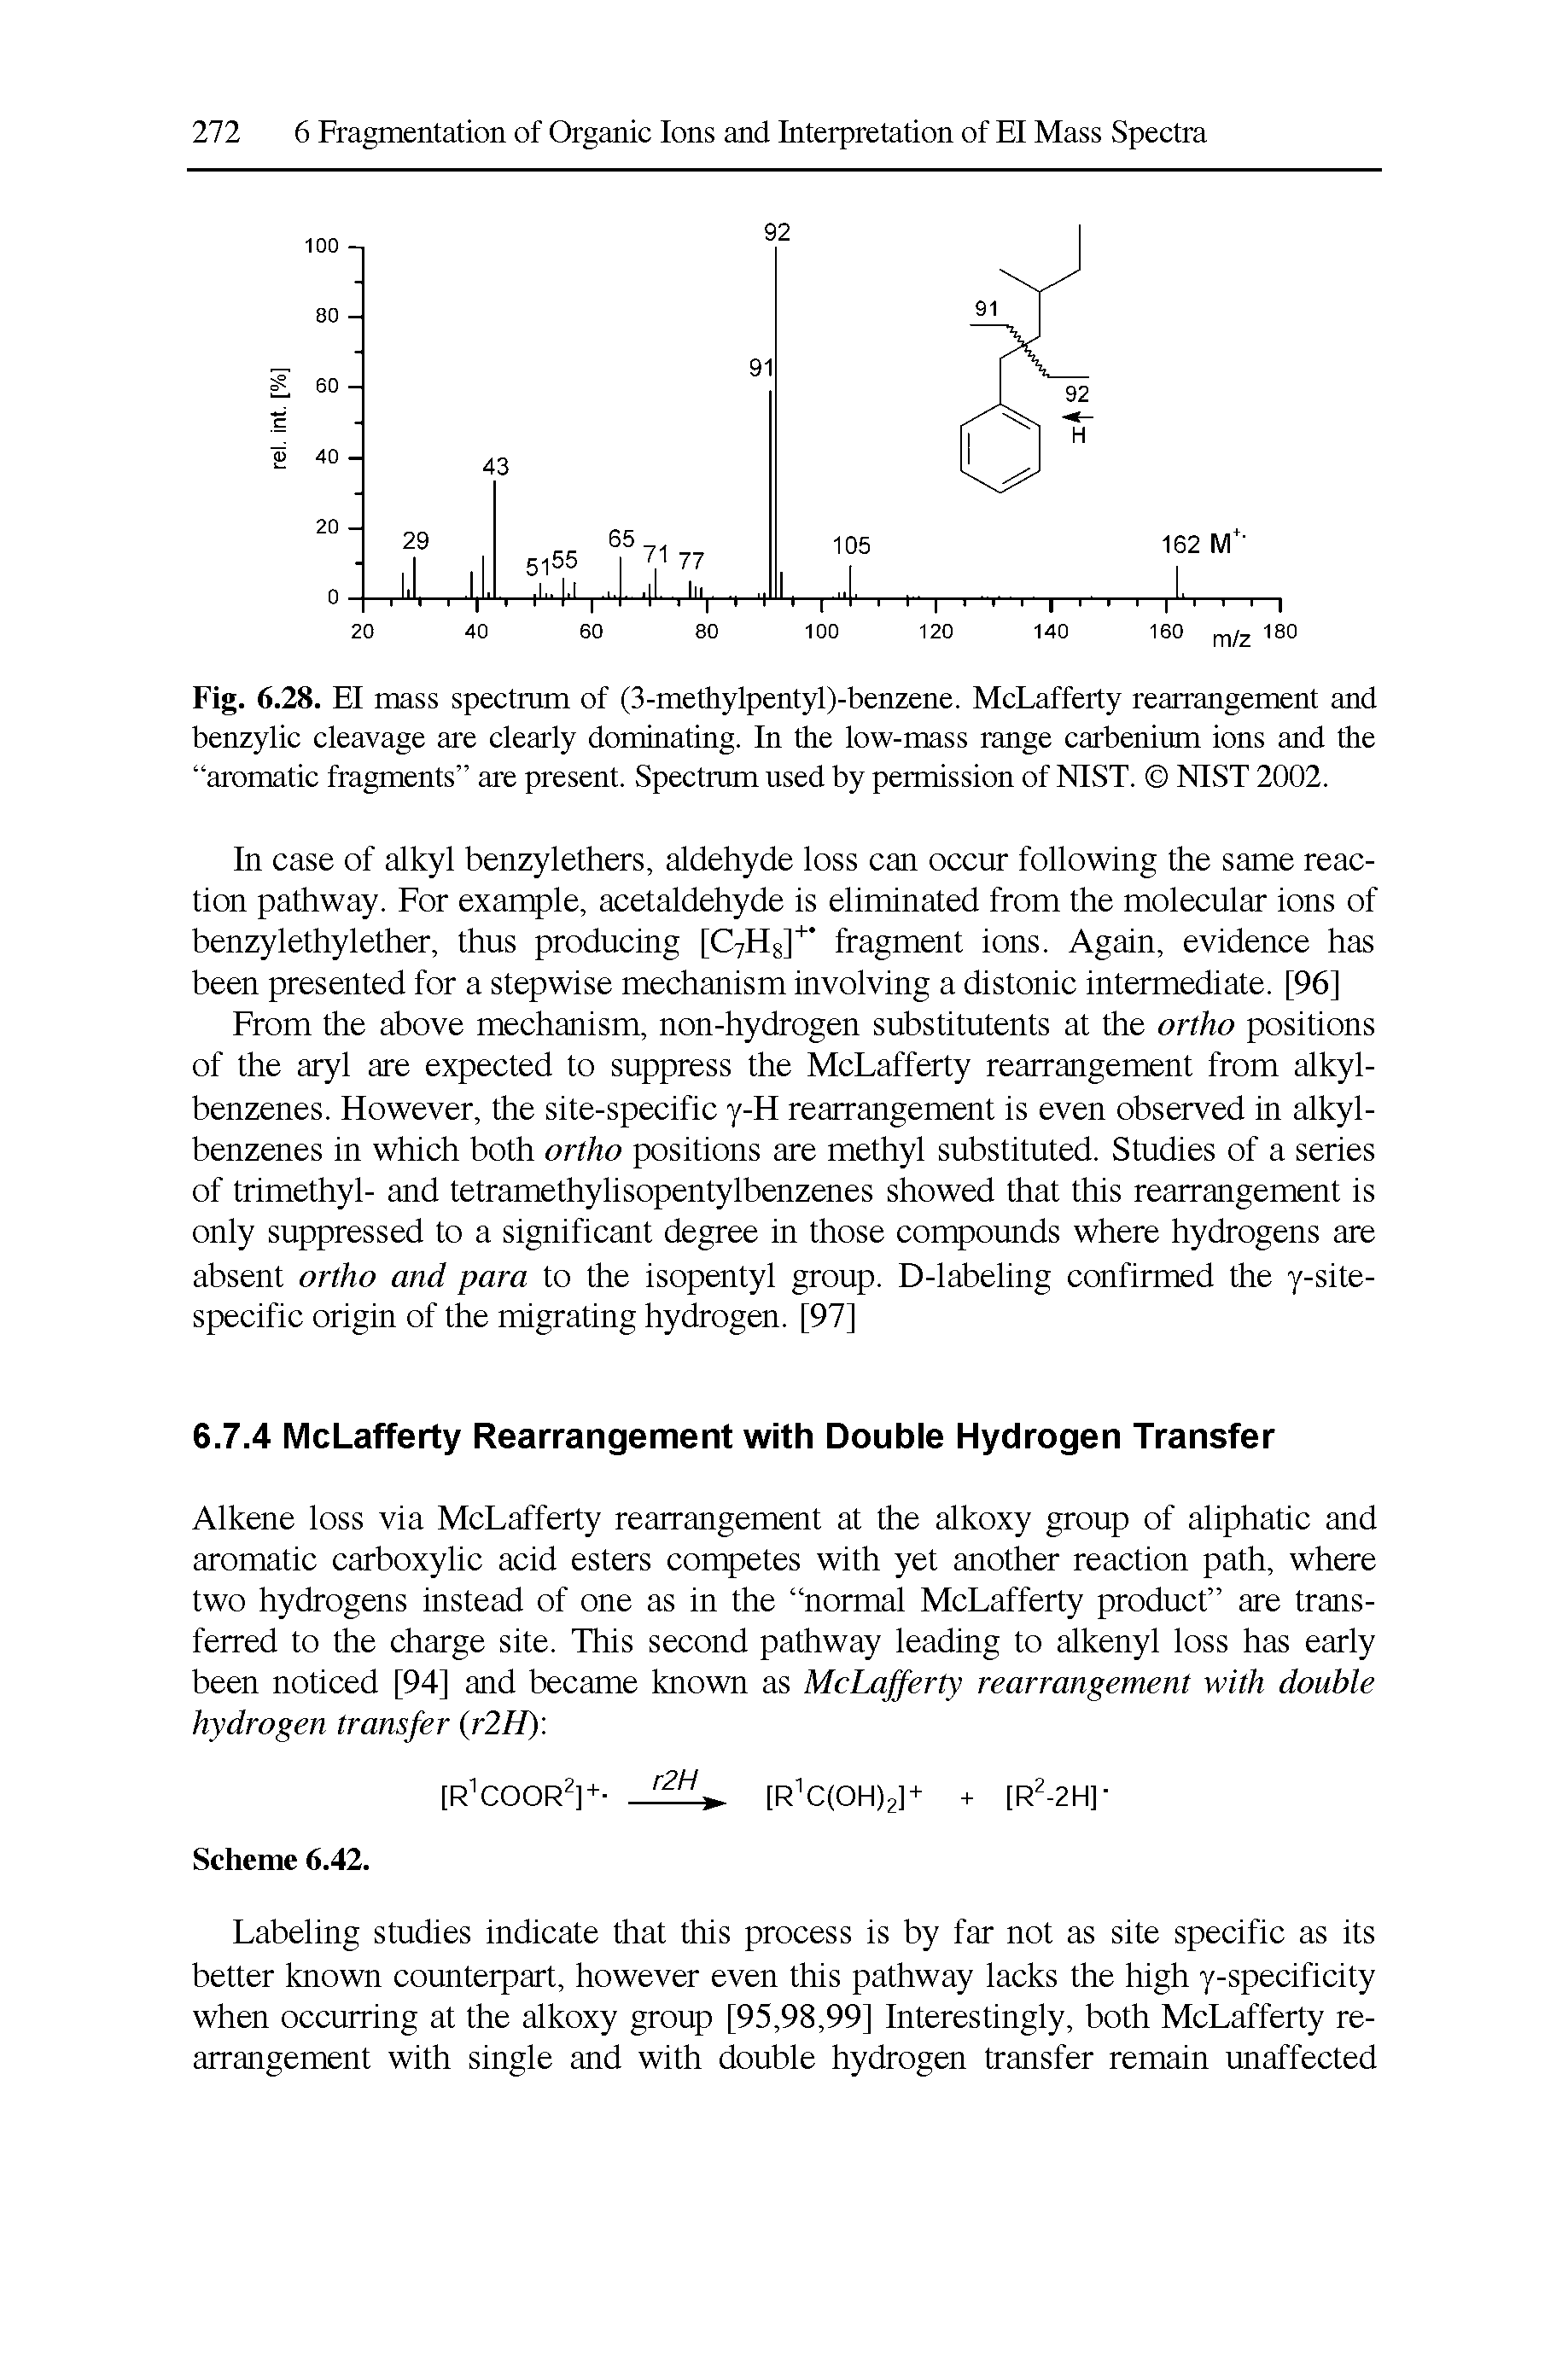 Fig. 6.28. El mass spectrum of (3-methylpentyl)-benzene. McLafferty rearrangement and benzylic cleavage are clearly dominating. In the low-mass range carbenium ions and the aromatic fragments are present. Spectmm used by permission of NIST. NIST 2002.